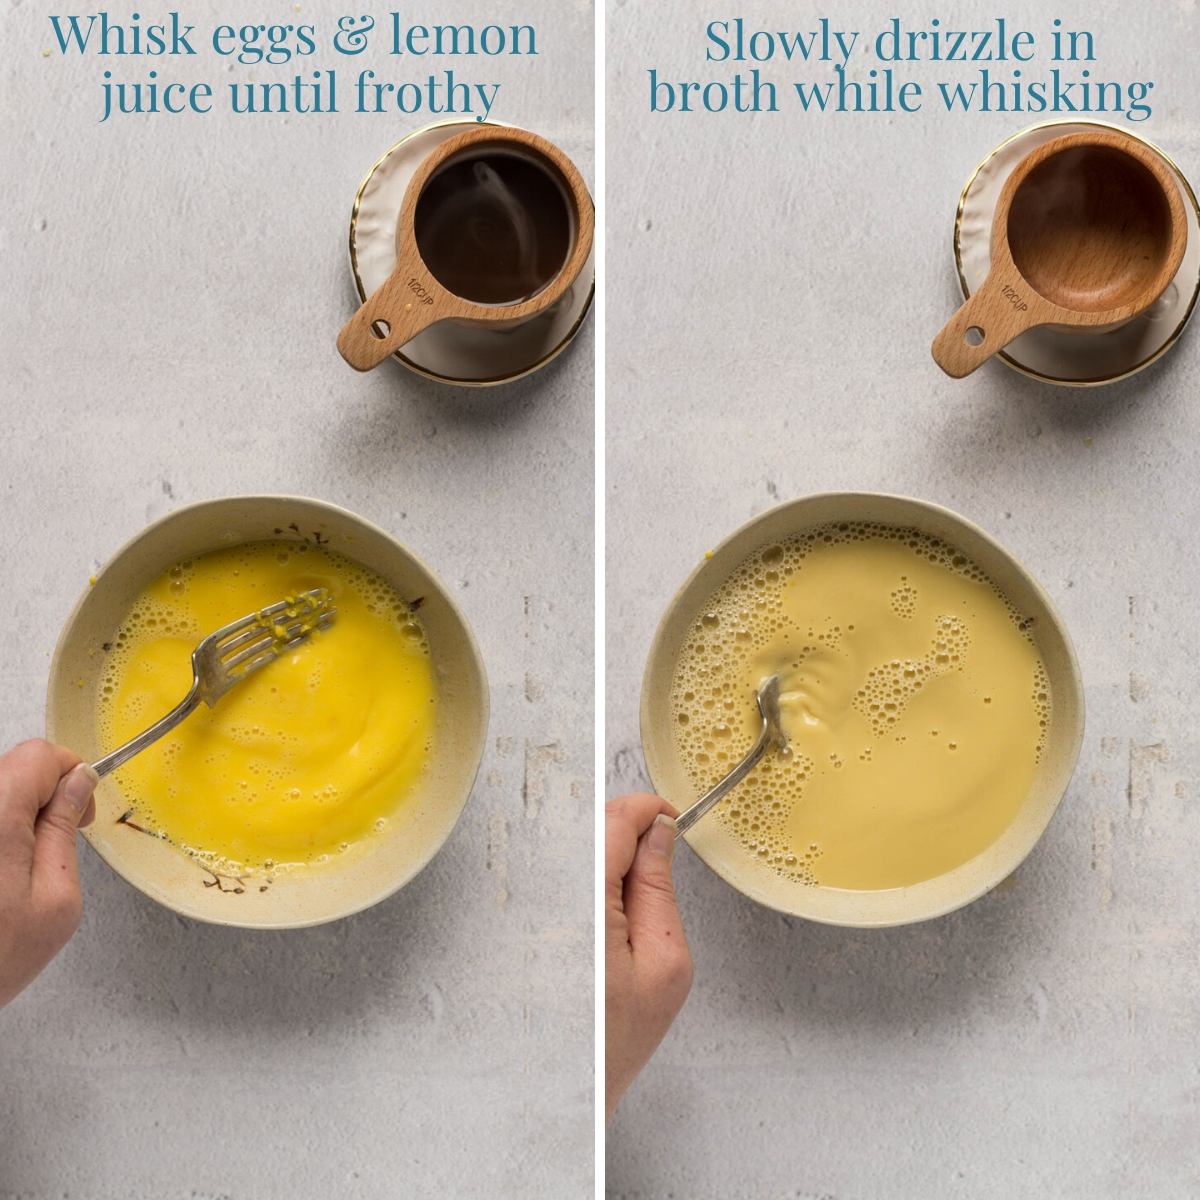 Lemon juice whisked in a bowl